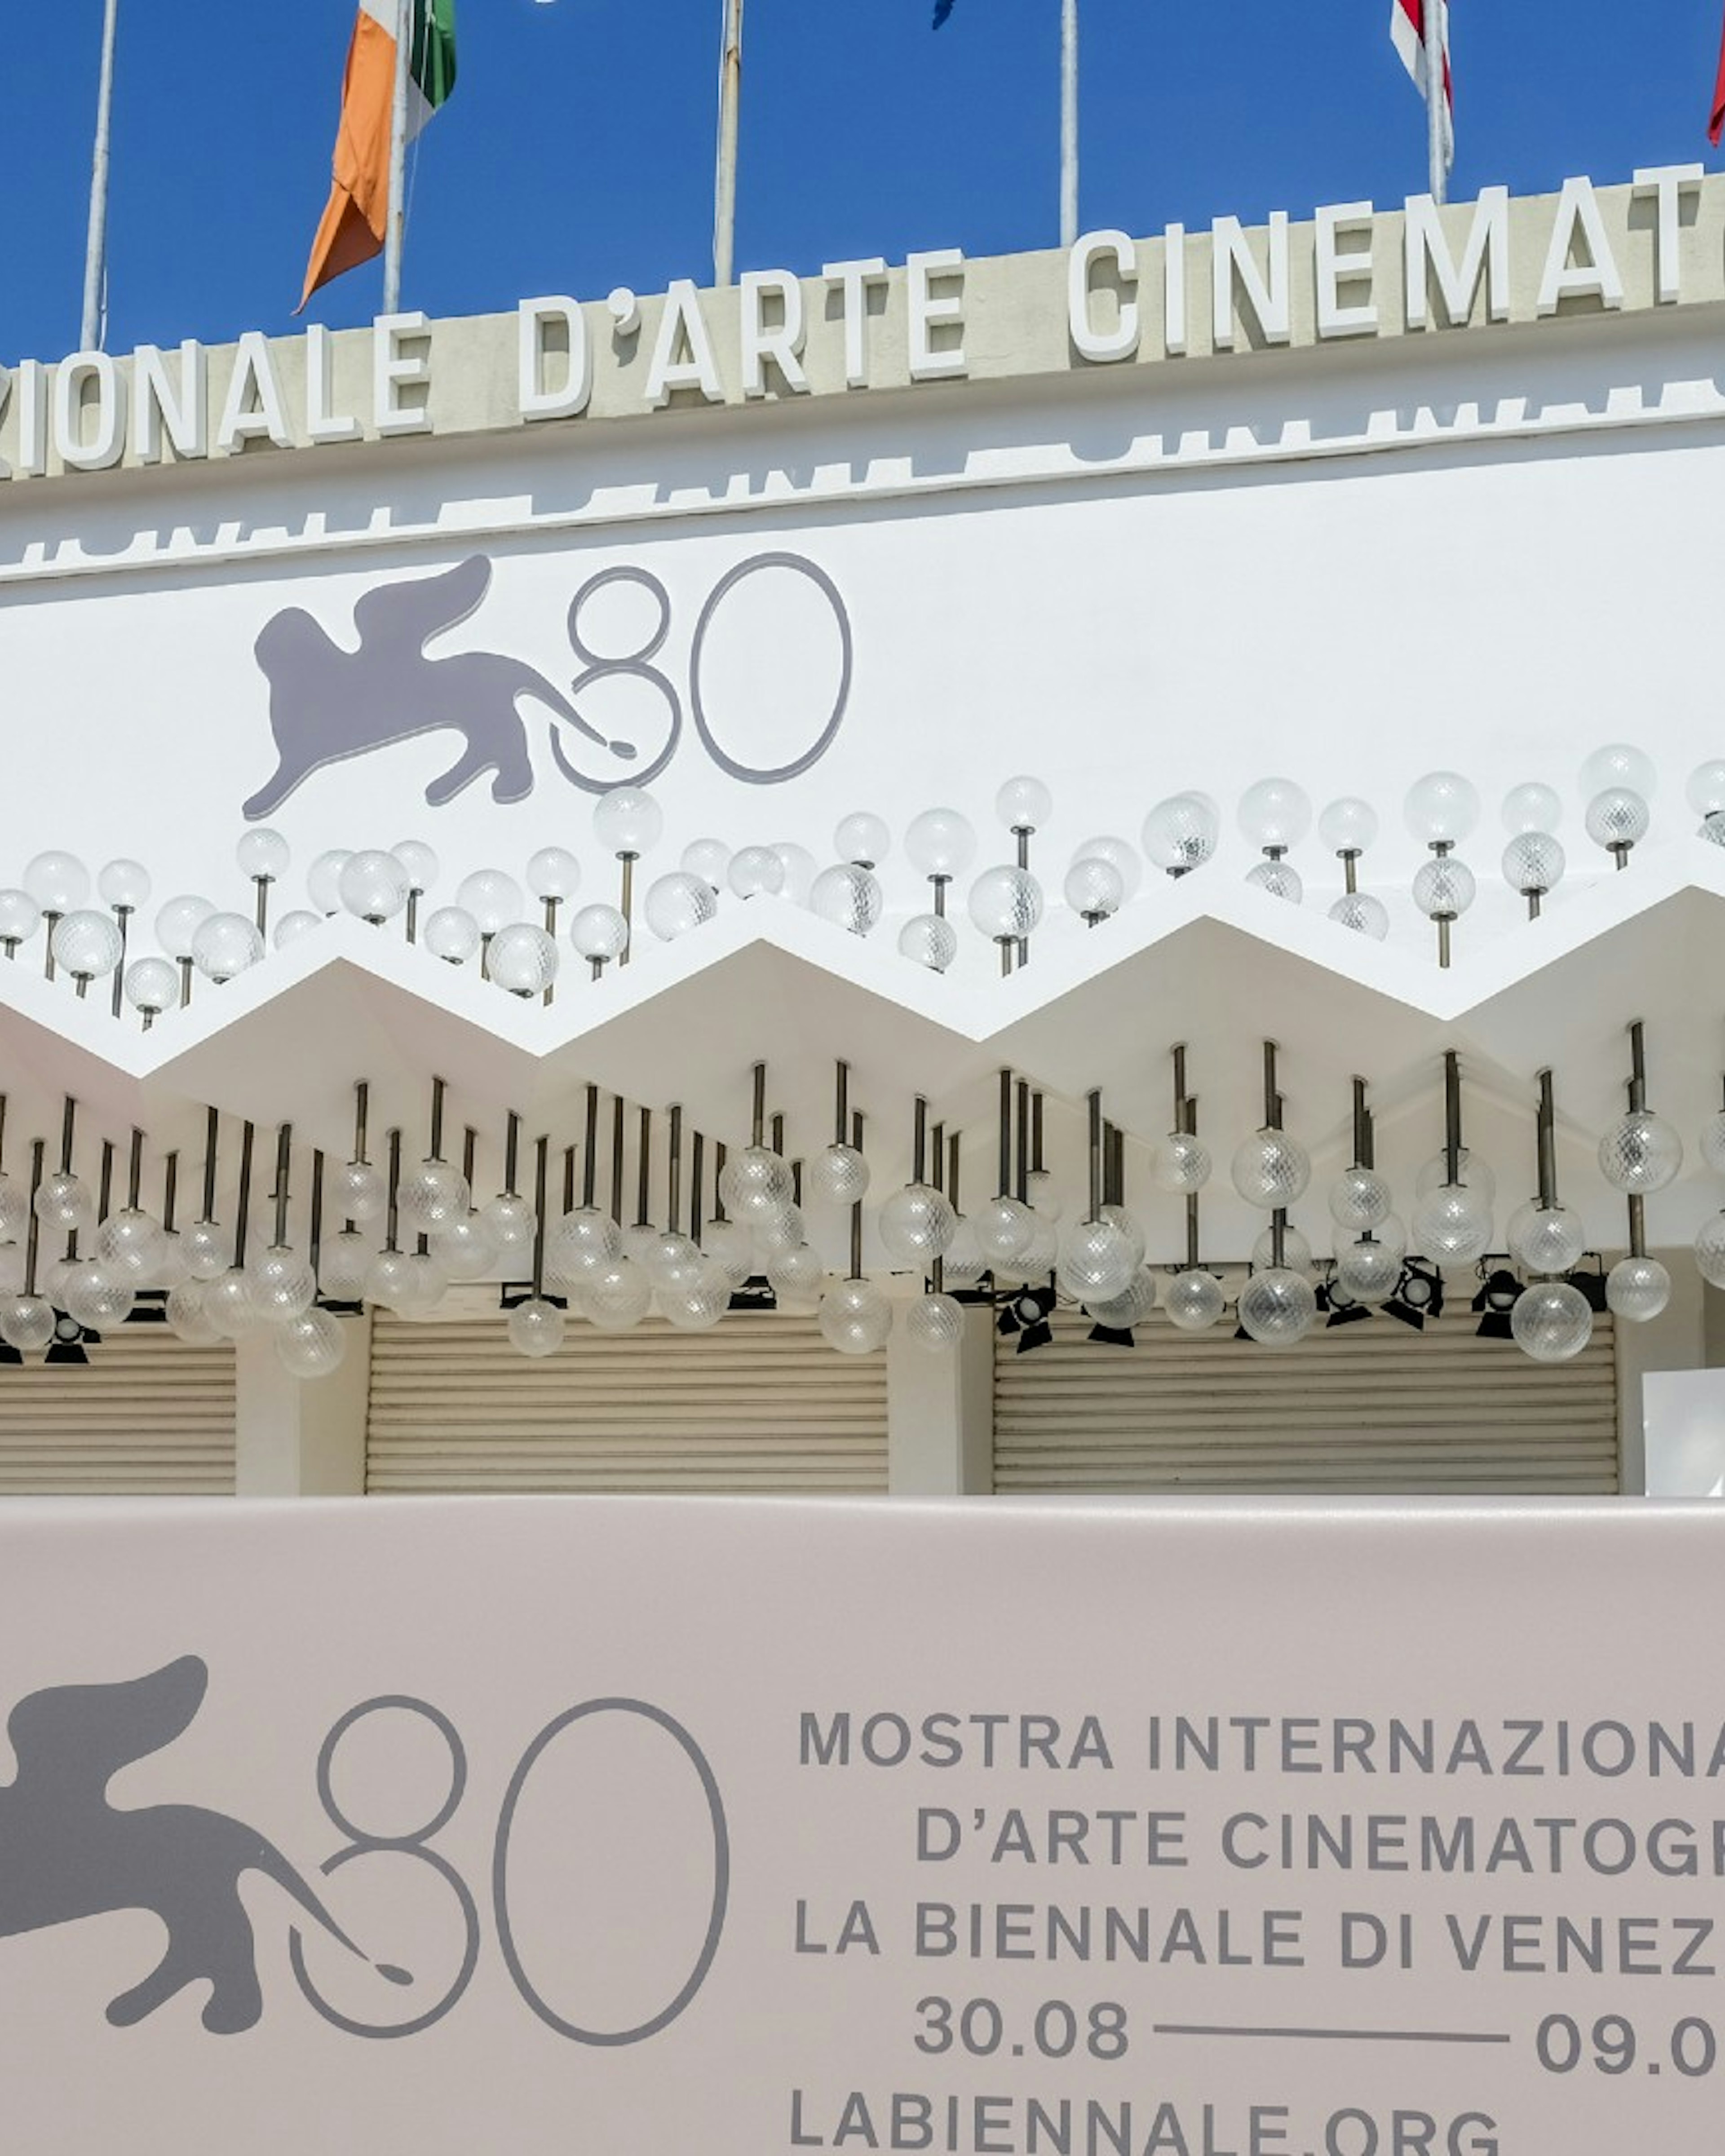 An event banner is displayed outside the "Palazzo del Cinema" ahead of the 80th Venice International Film Festival 2023 on August 25, 2023 in Venice, Italy.